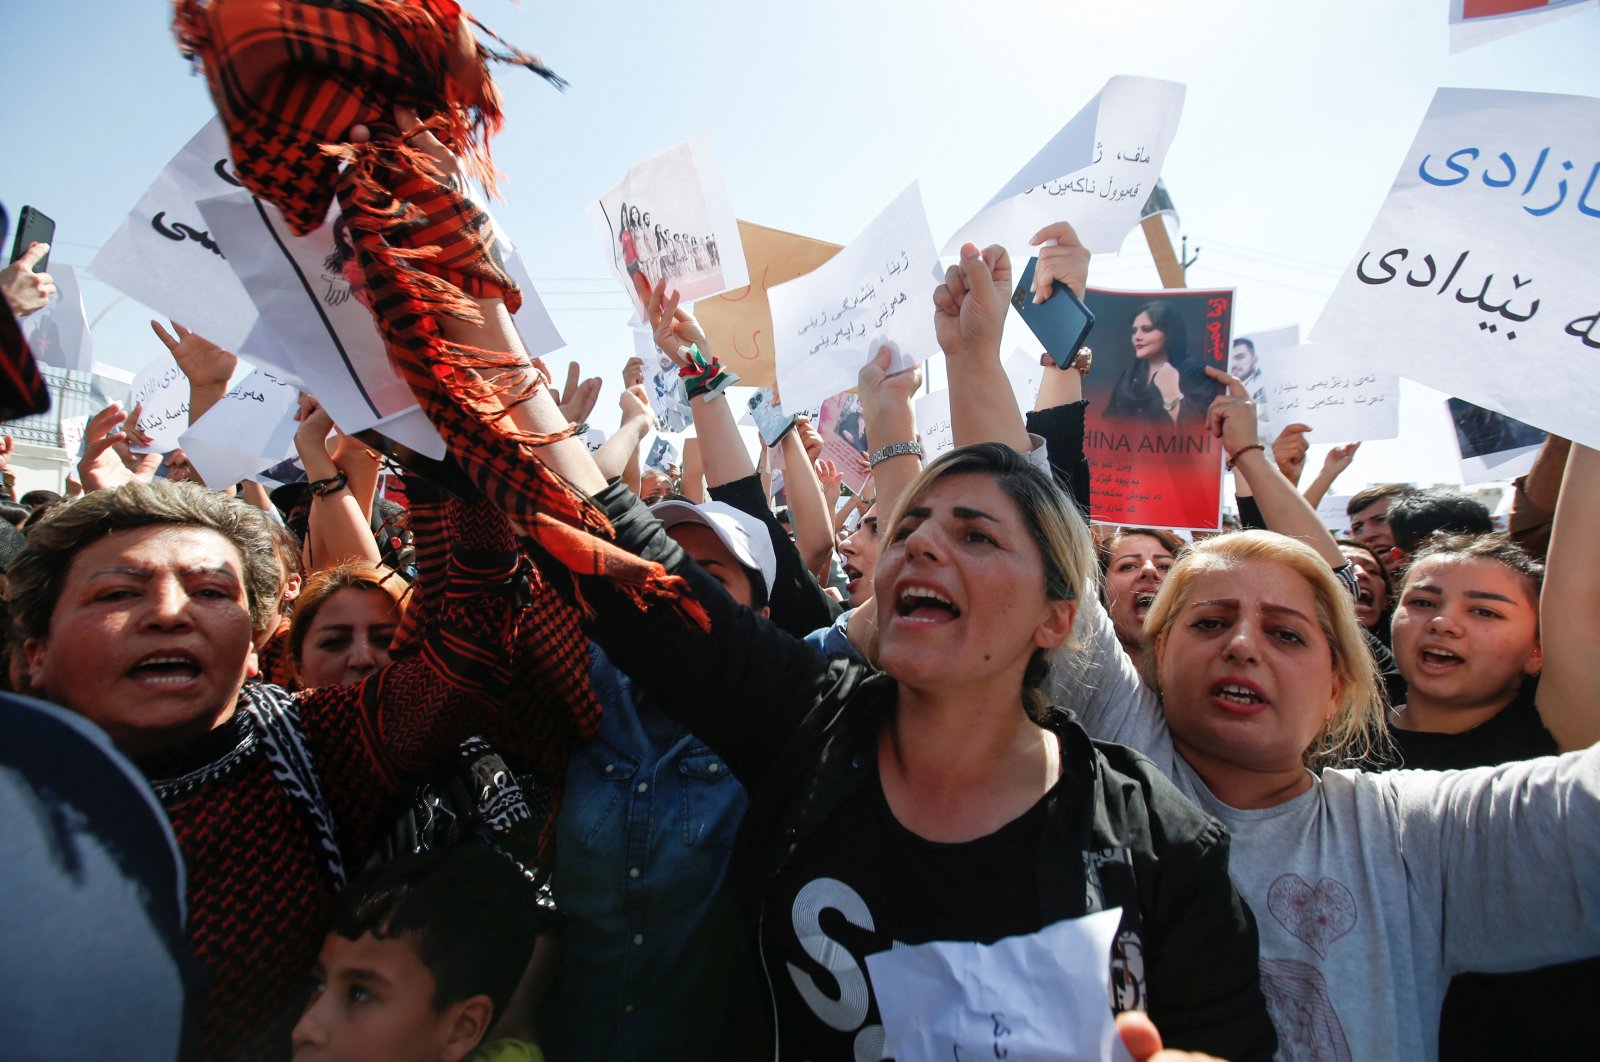 People take part in a protest following the death of Mahsa Amini in front of the United Nations headquarters in Irbil, Iraq, Sept. 24, 2022. (Reuters Photo)